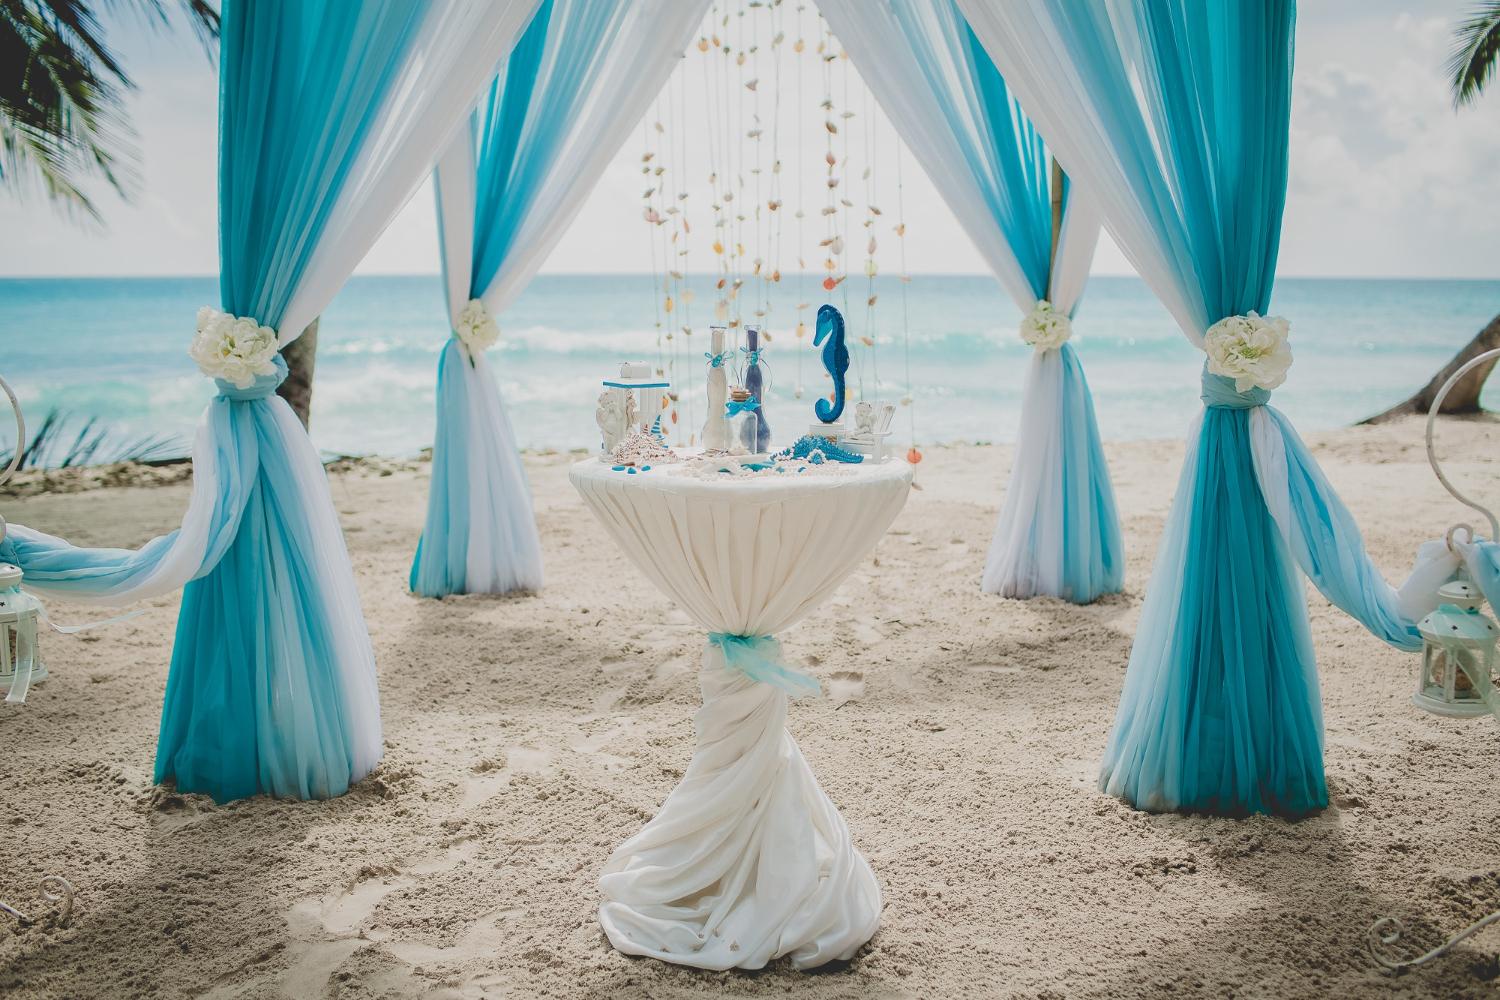 Celebrate Love by the Seaside: The Advantages of a Beach Wedding